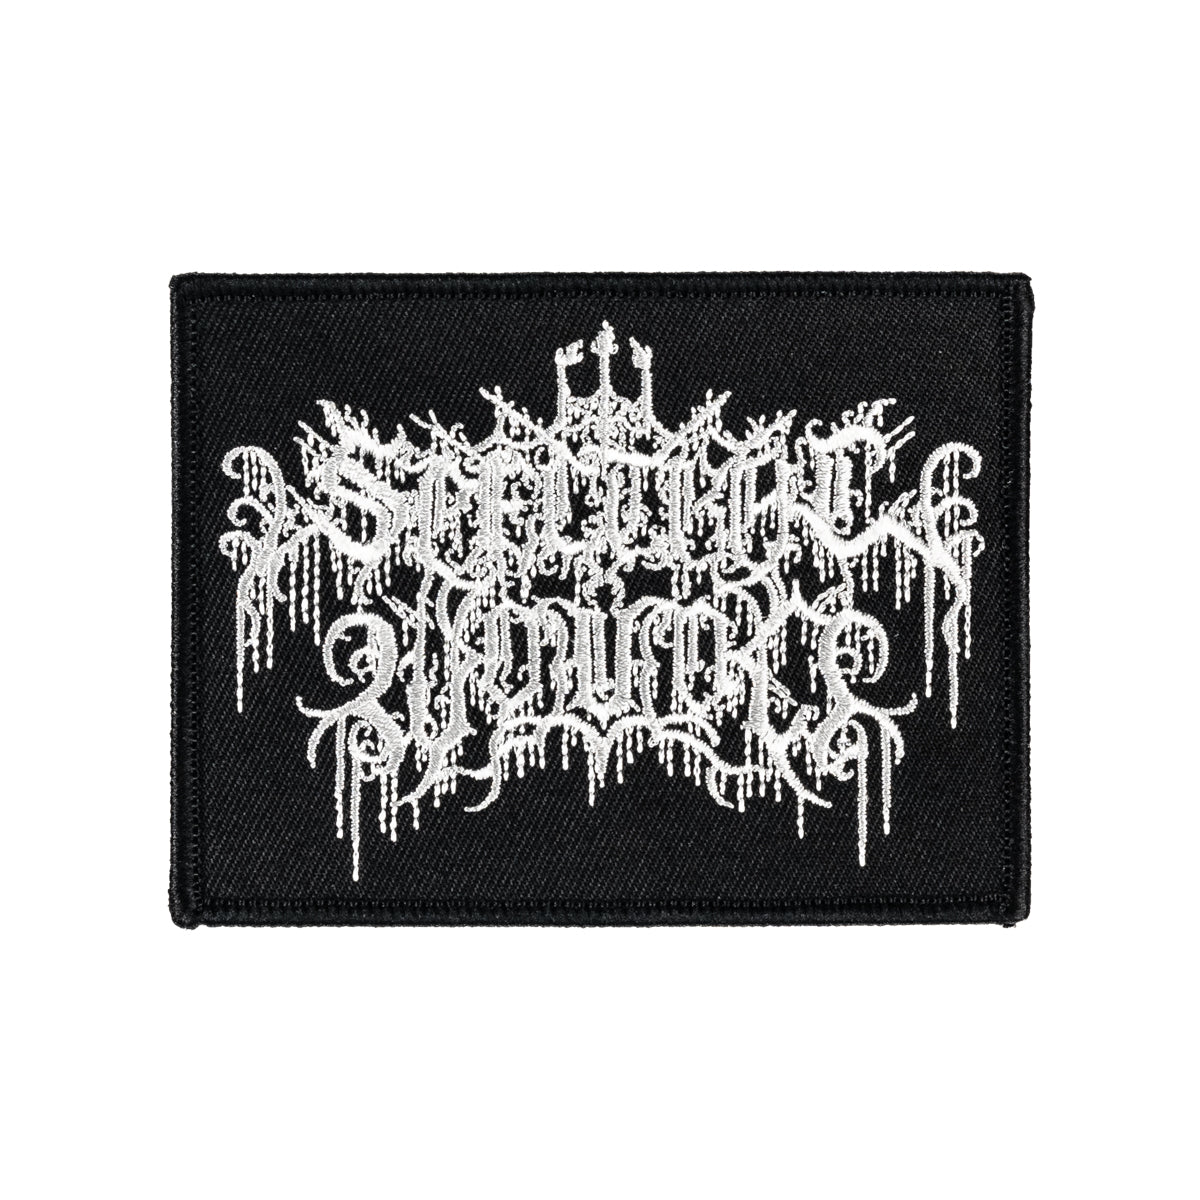 SPECTRAL WOUND "New Logo" Patch